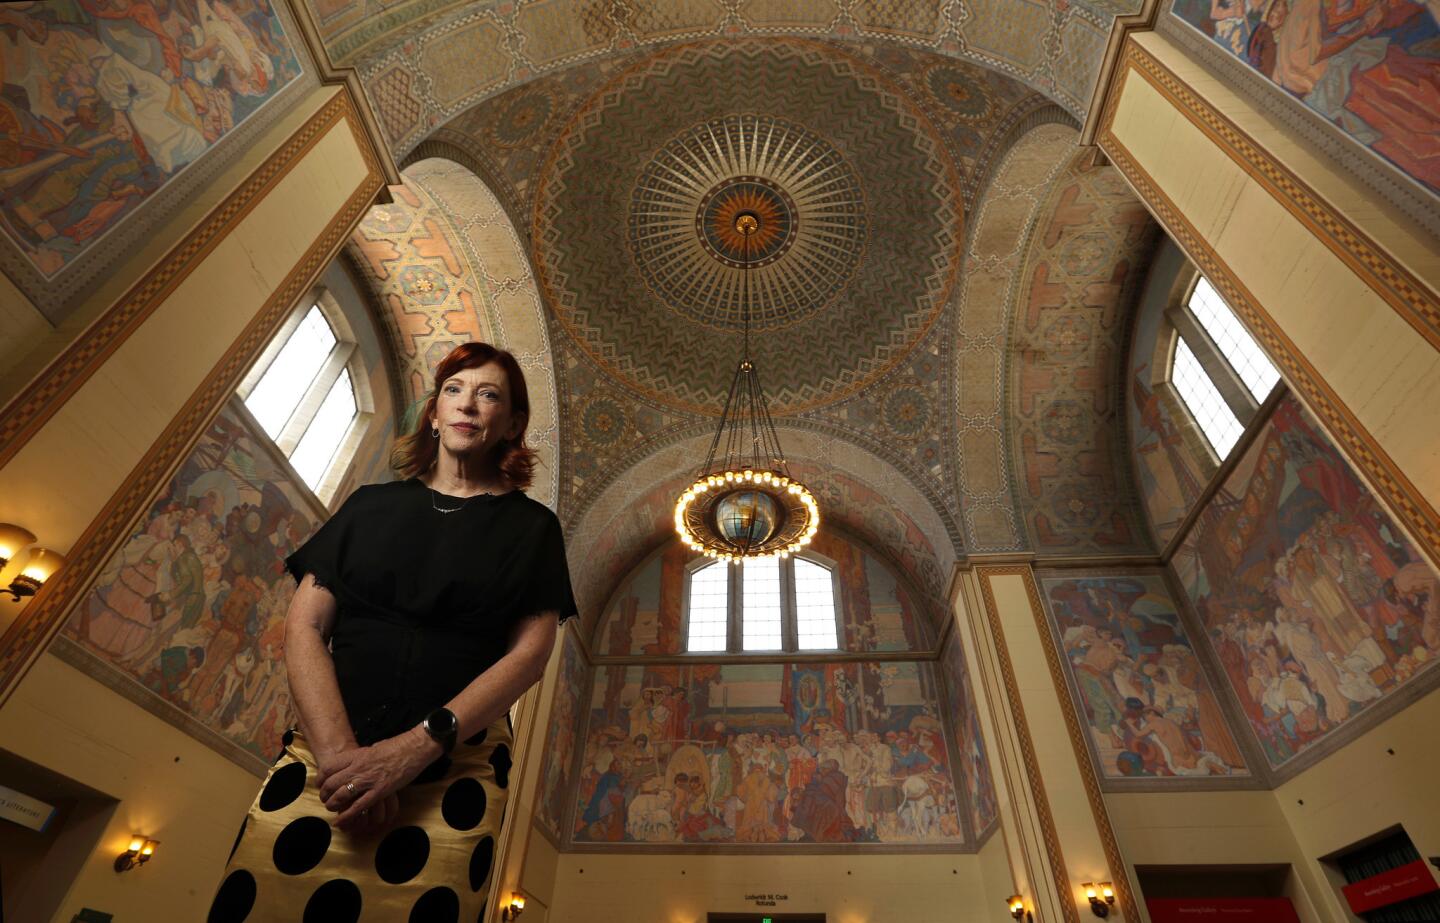 Susan Orlean looks into L.A. Central Library fire